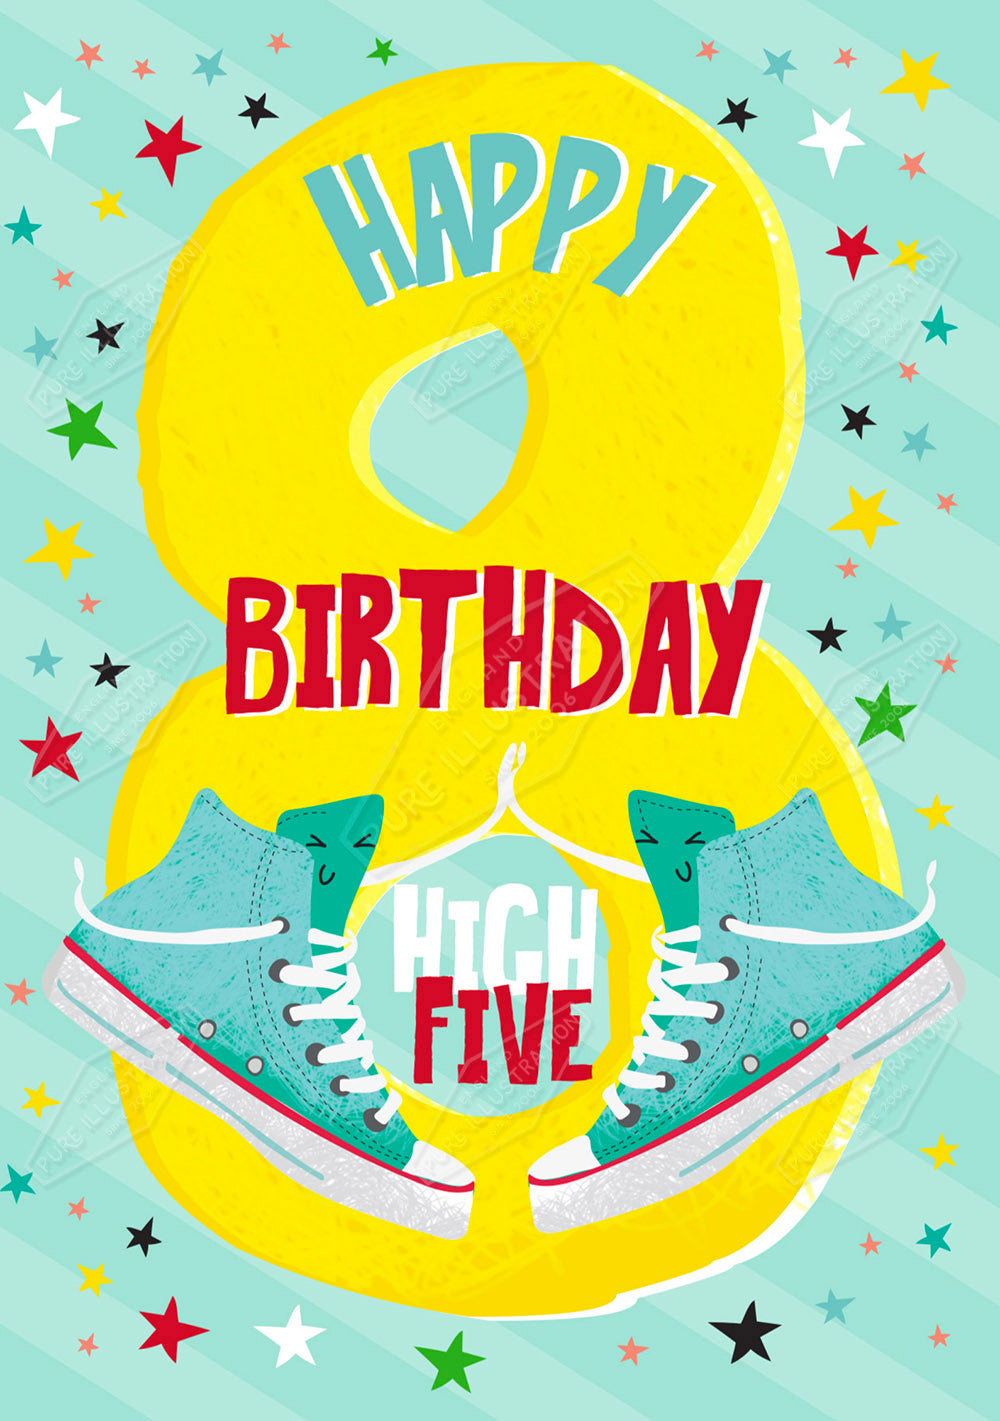 00034355EST- Emily Stalley is represented by Pure Art Licensing Agency - Birthday Greeting Card Design